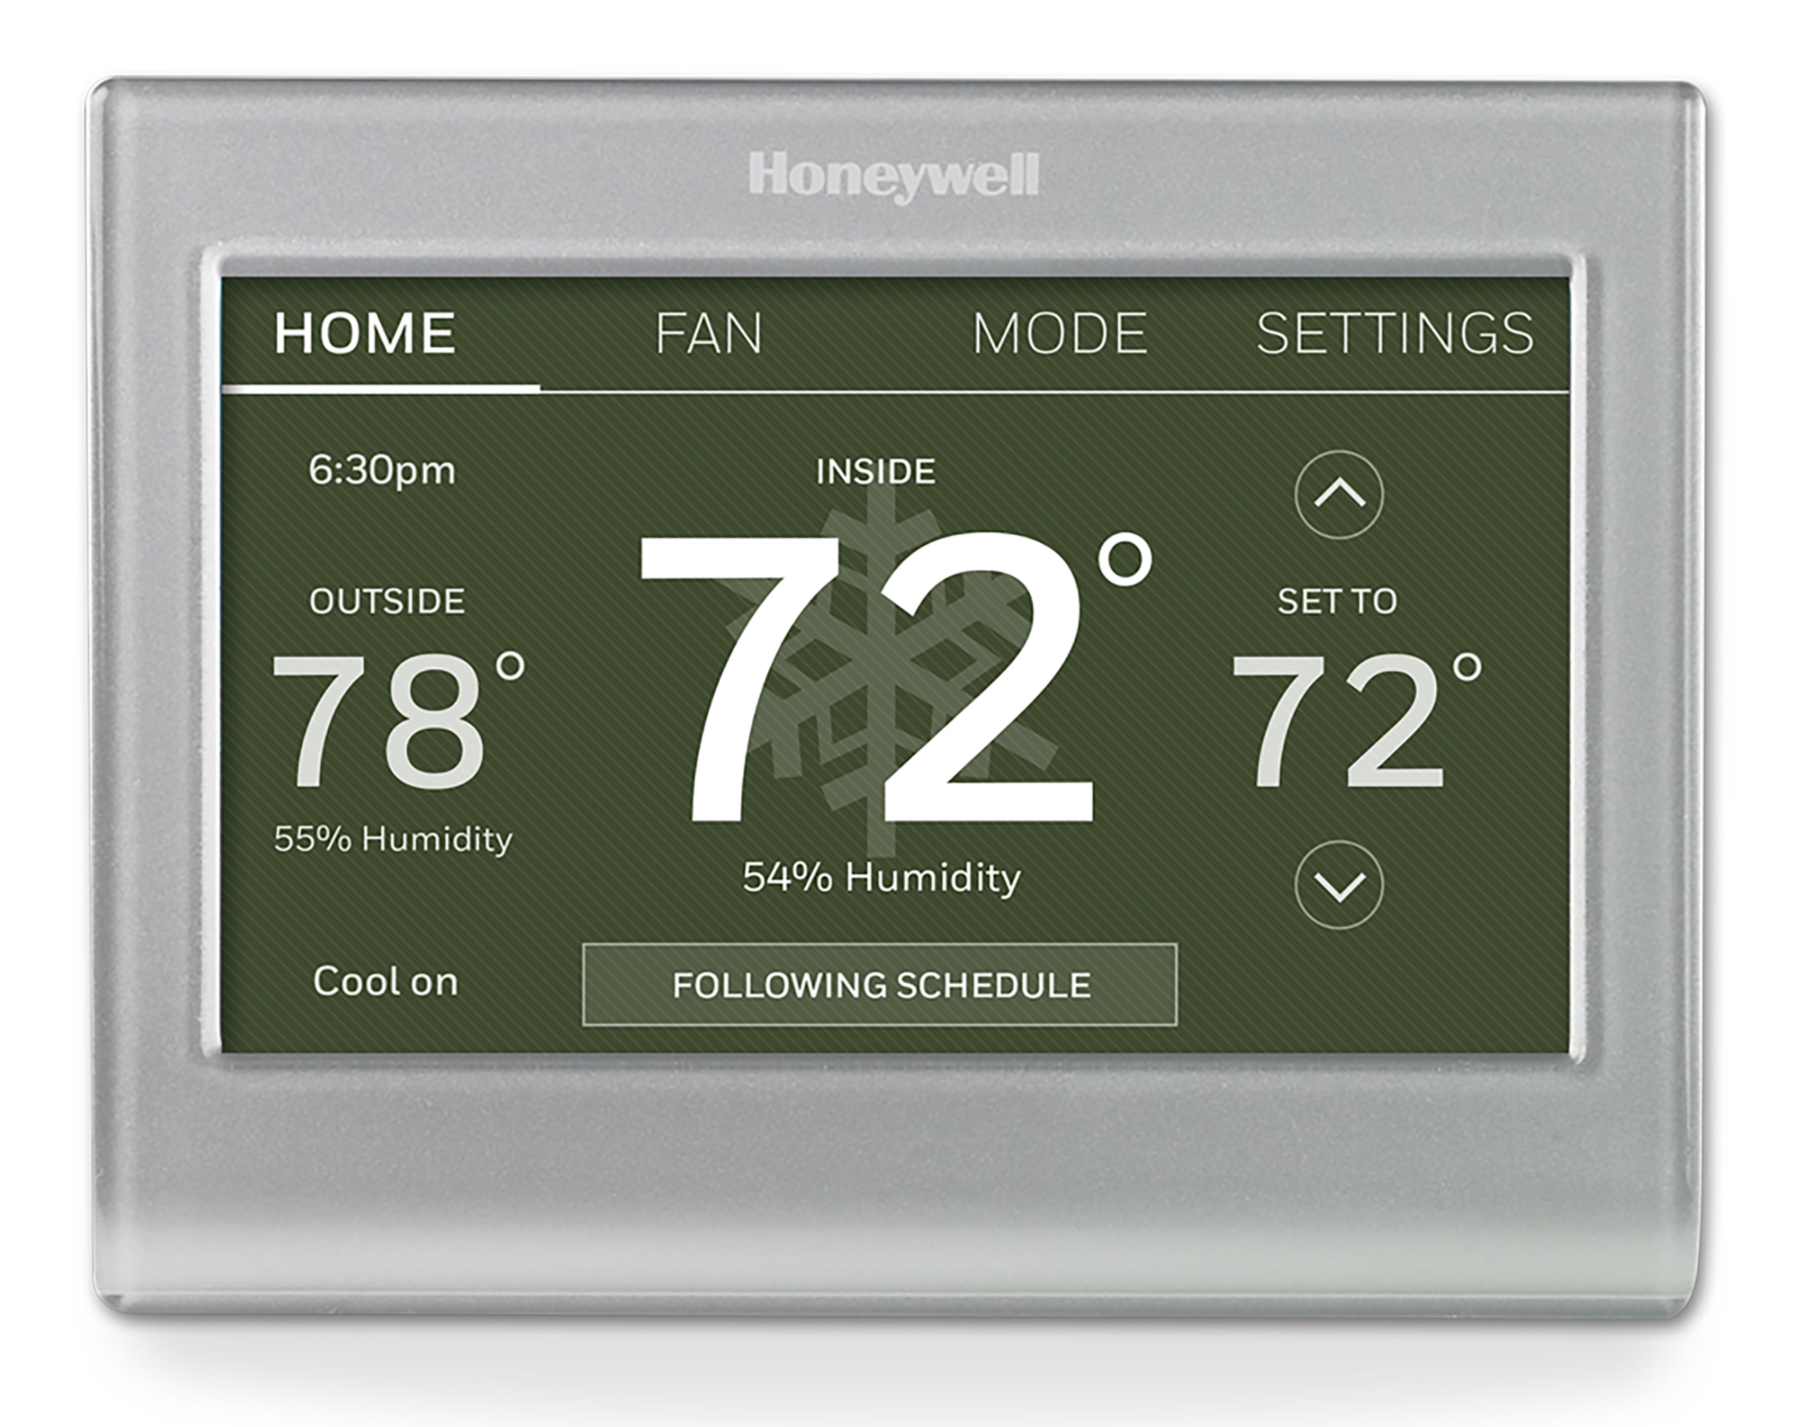 Honeywell RTH9585WF1004 Gray Wi-Fi Smart Color Thermostat - image 4 of 6